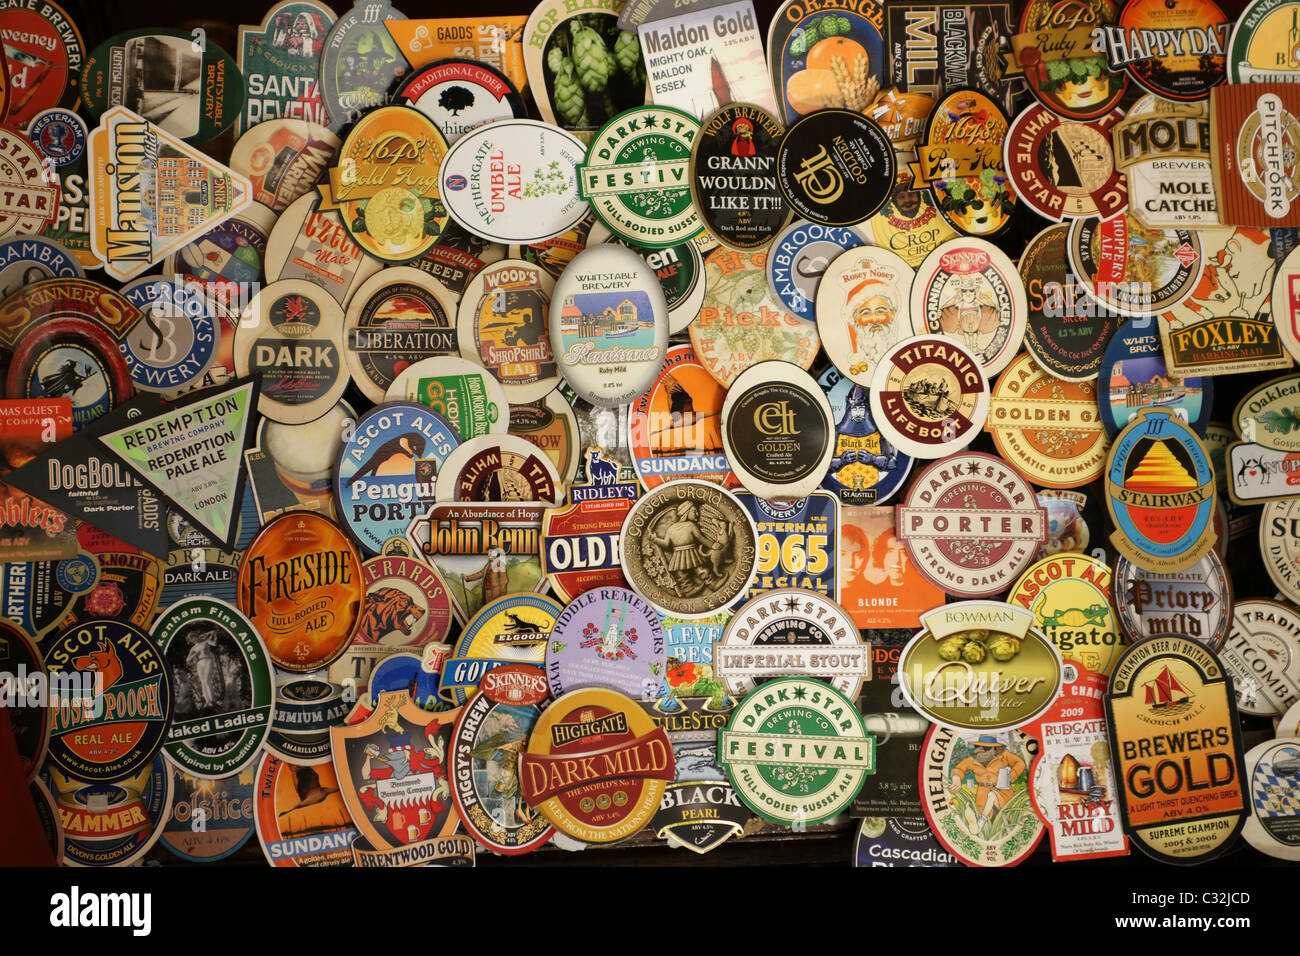 Real ale pump clips Stock Photo